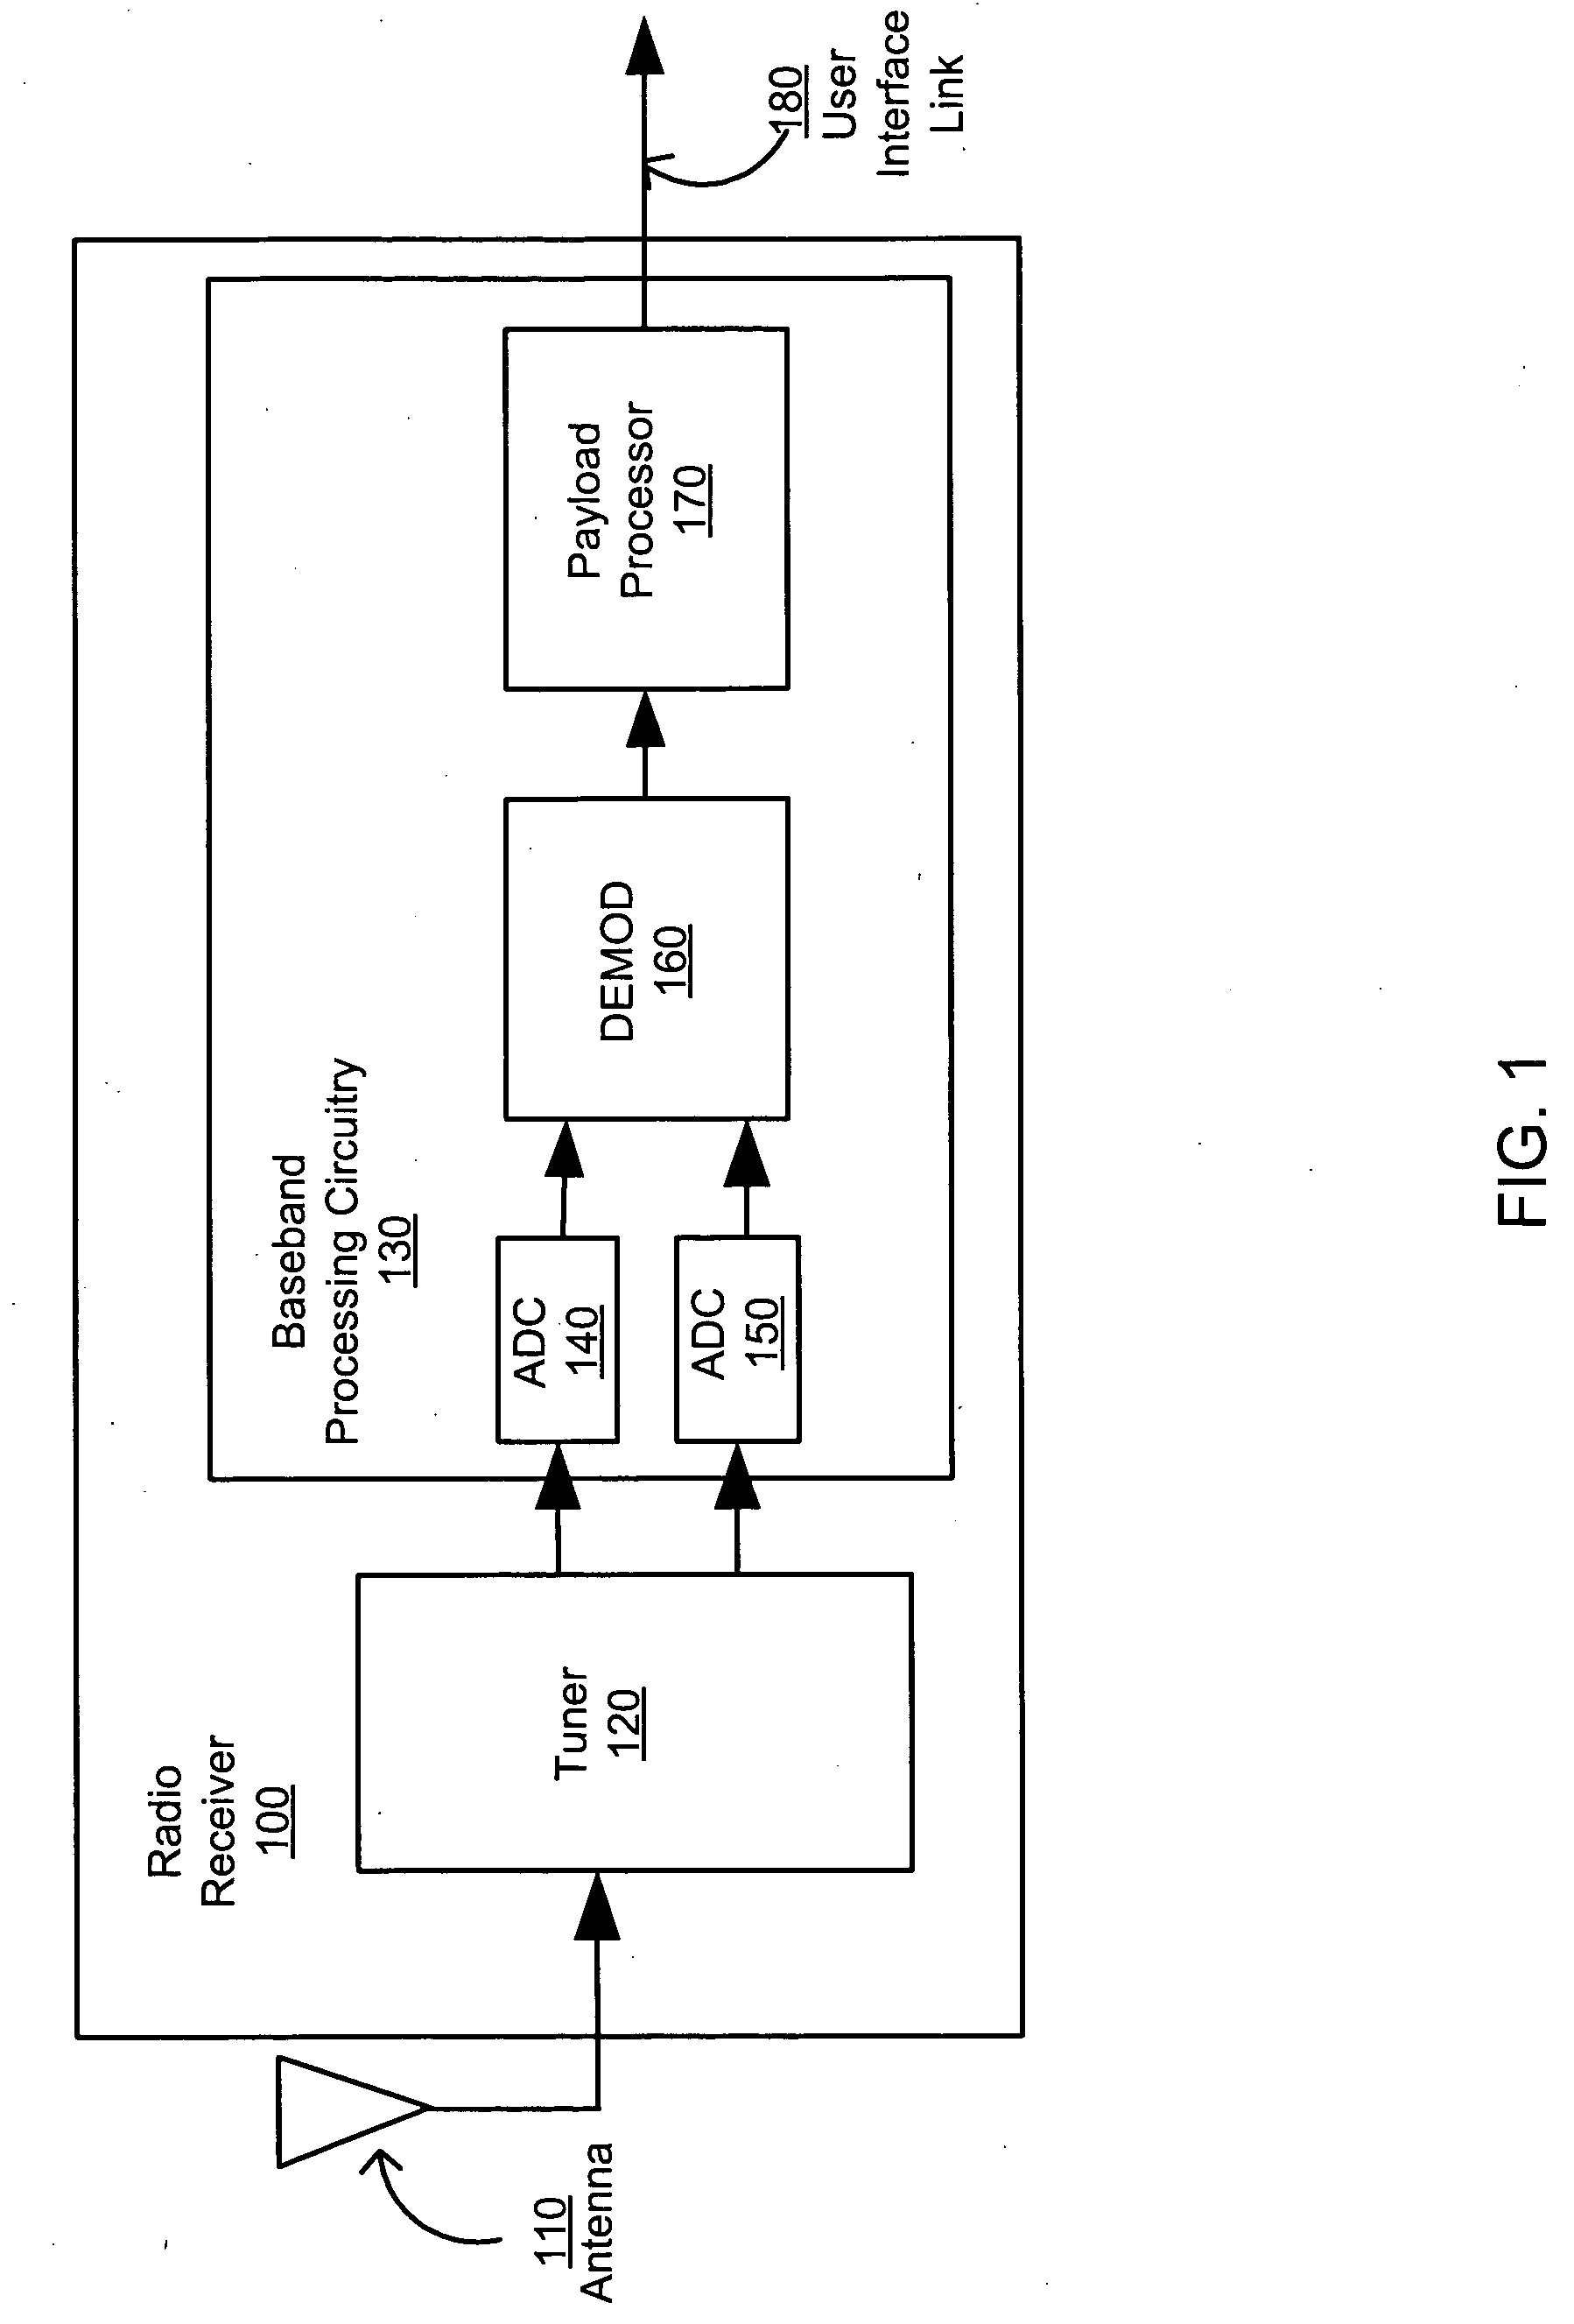 Low power digital media broadcast receiver with time division